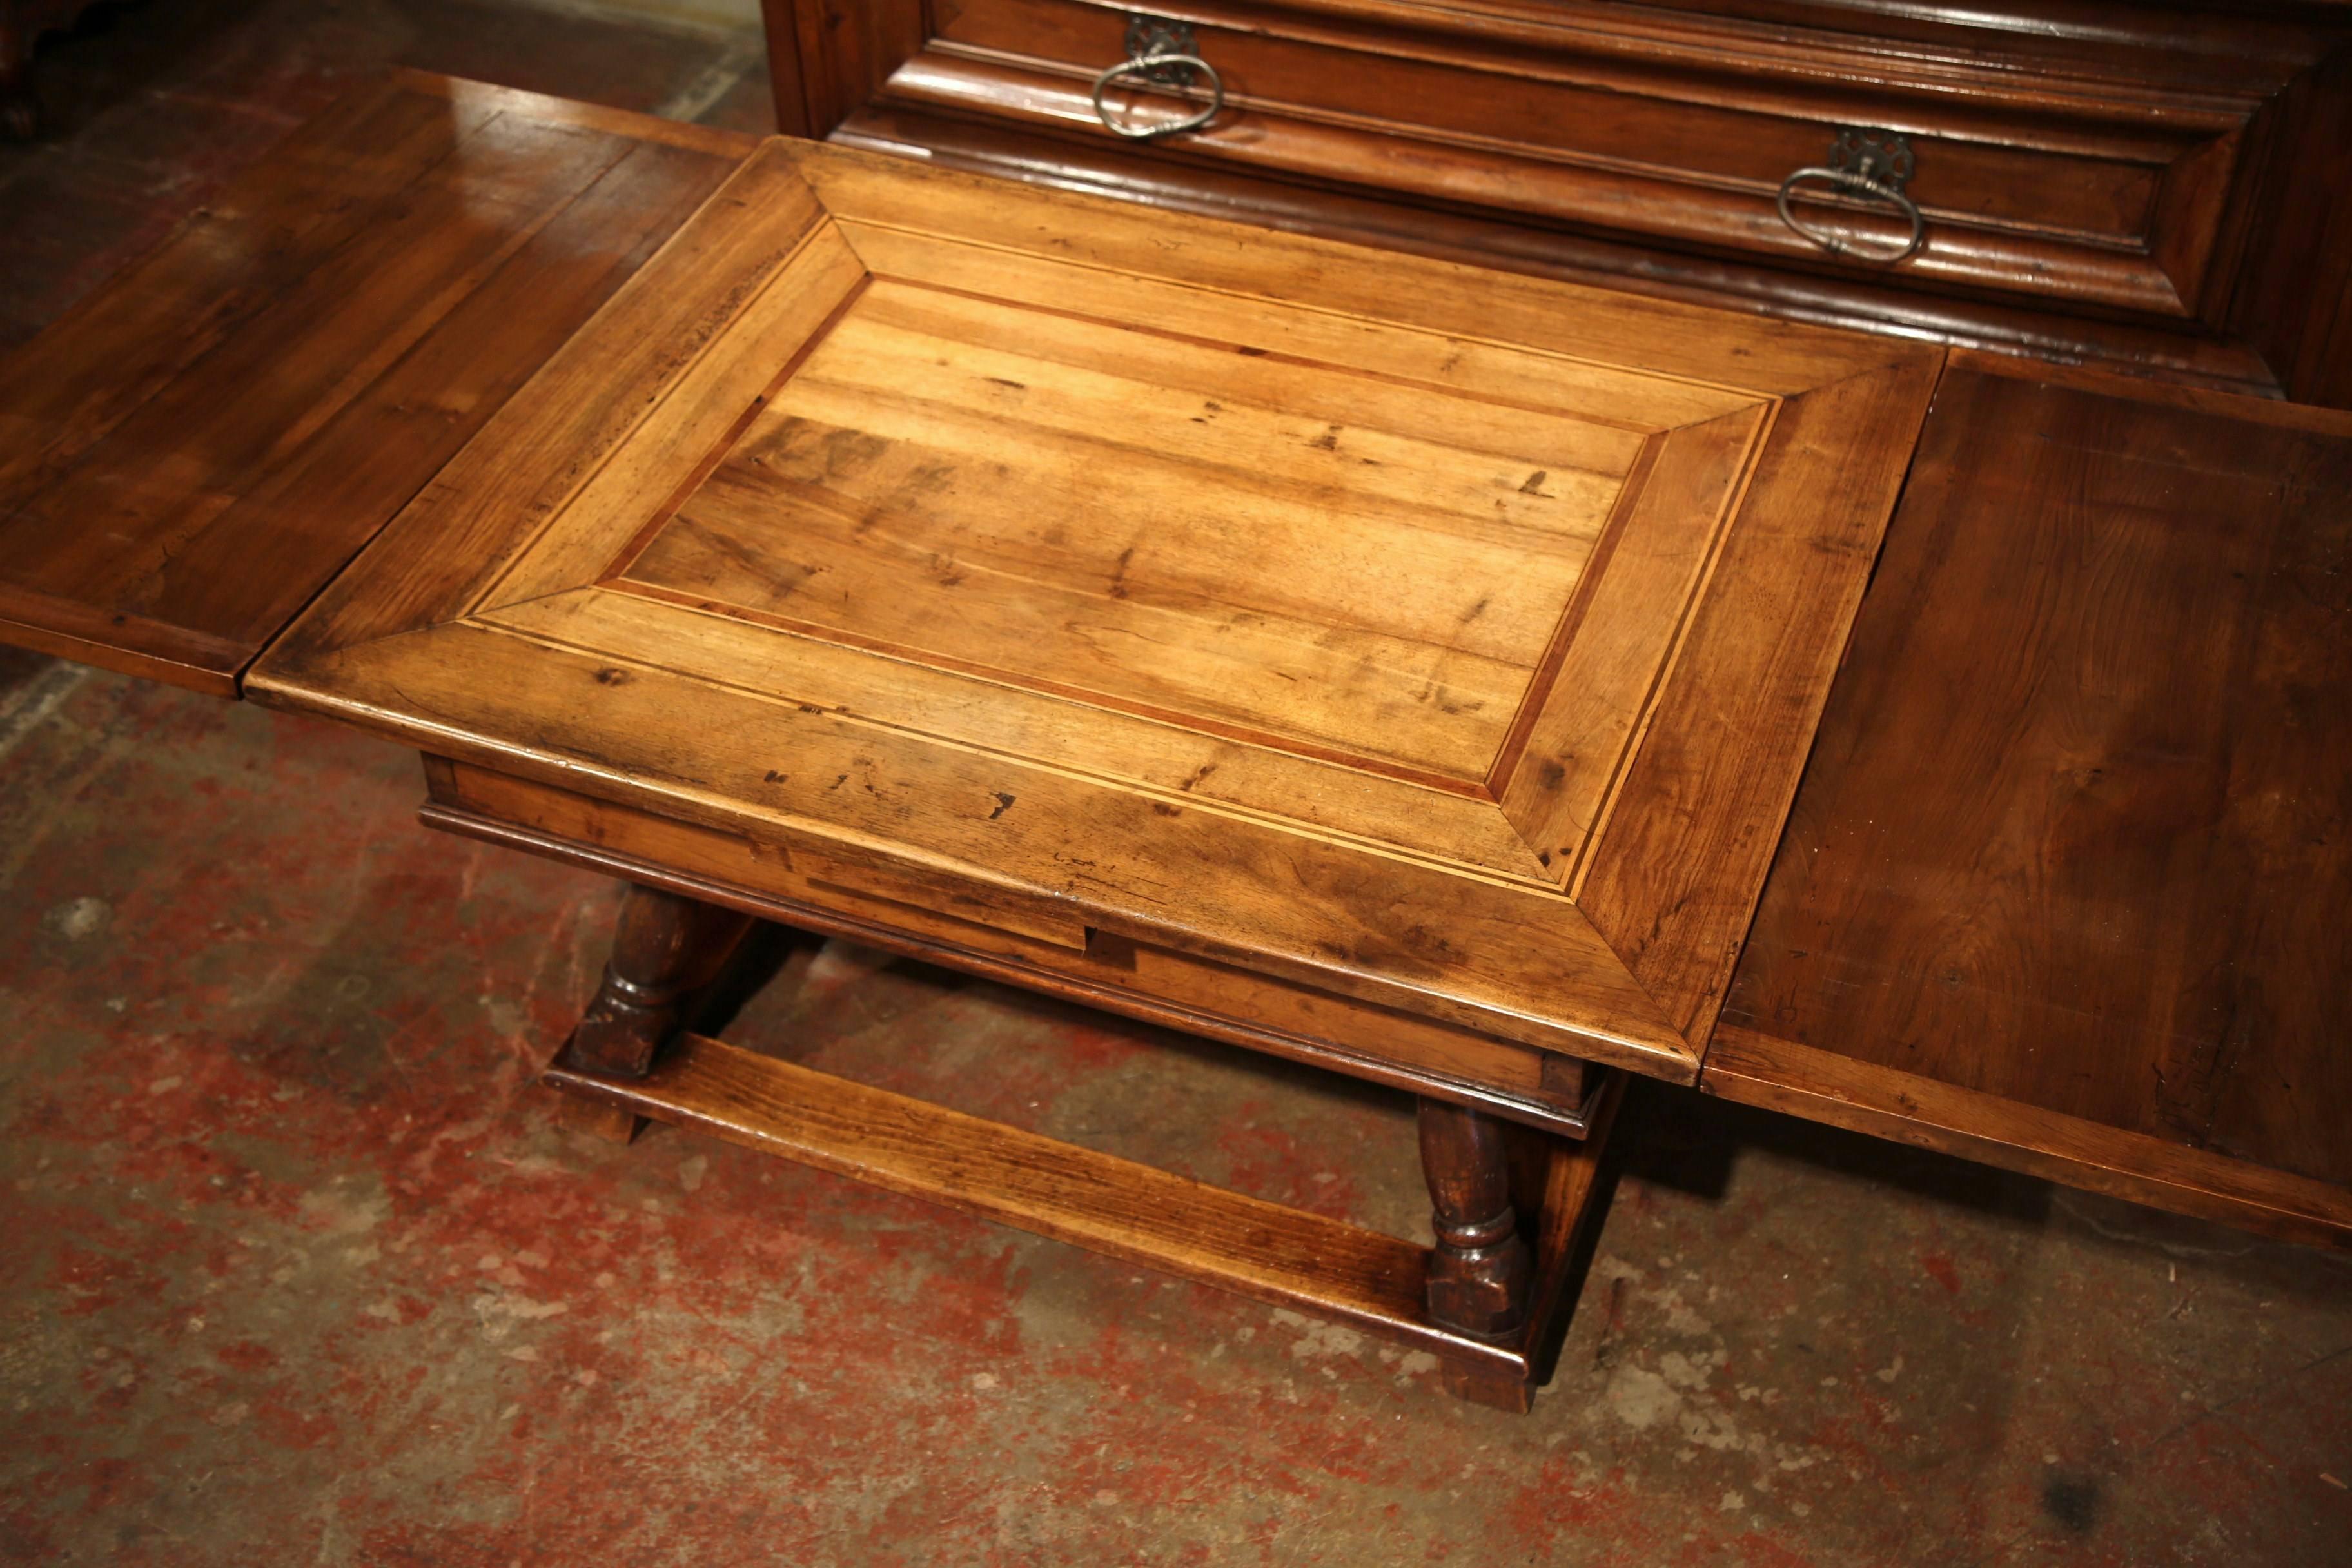 Hand-Carved 18th Century, French Walnut Coffee Table with Drawers and Pull-Out Leaves